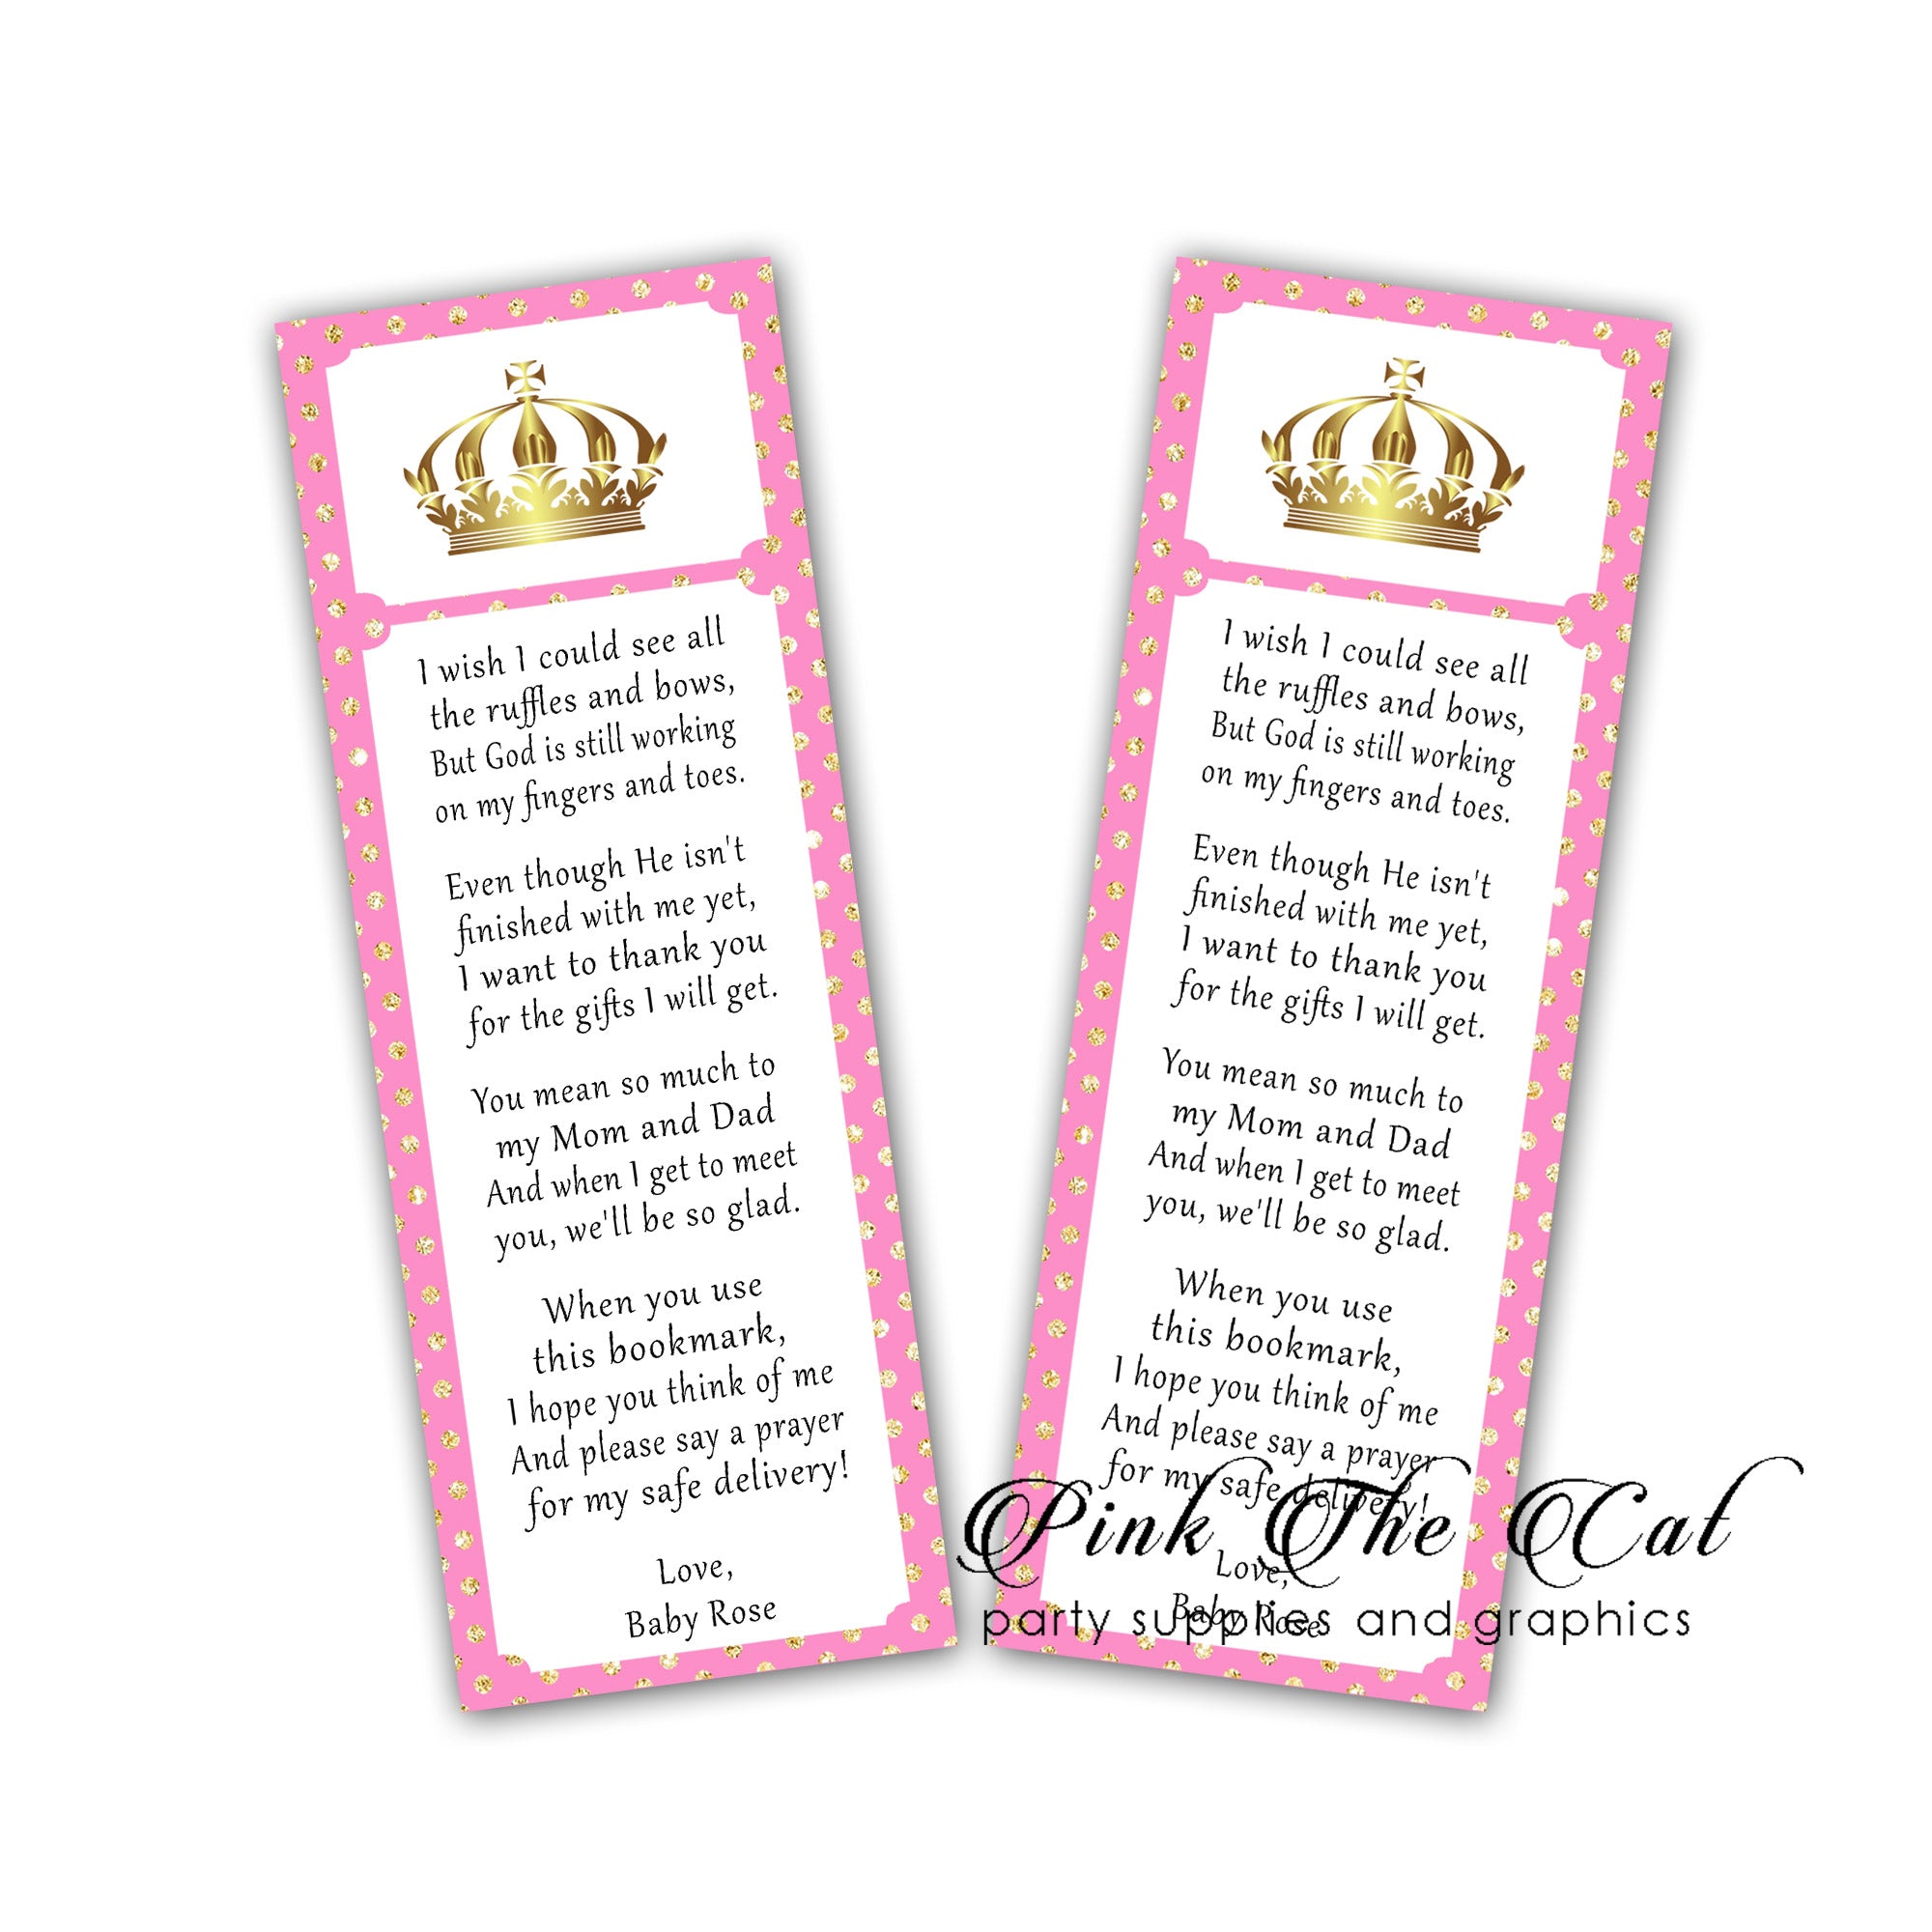 Printable princess bookmarks pink gold personalized baby shower favors